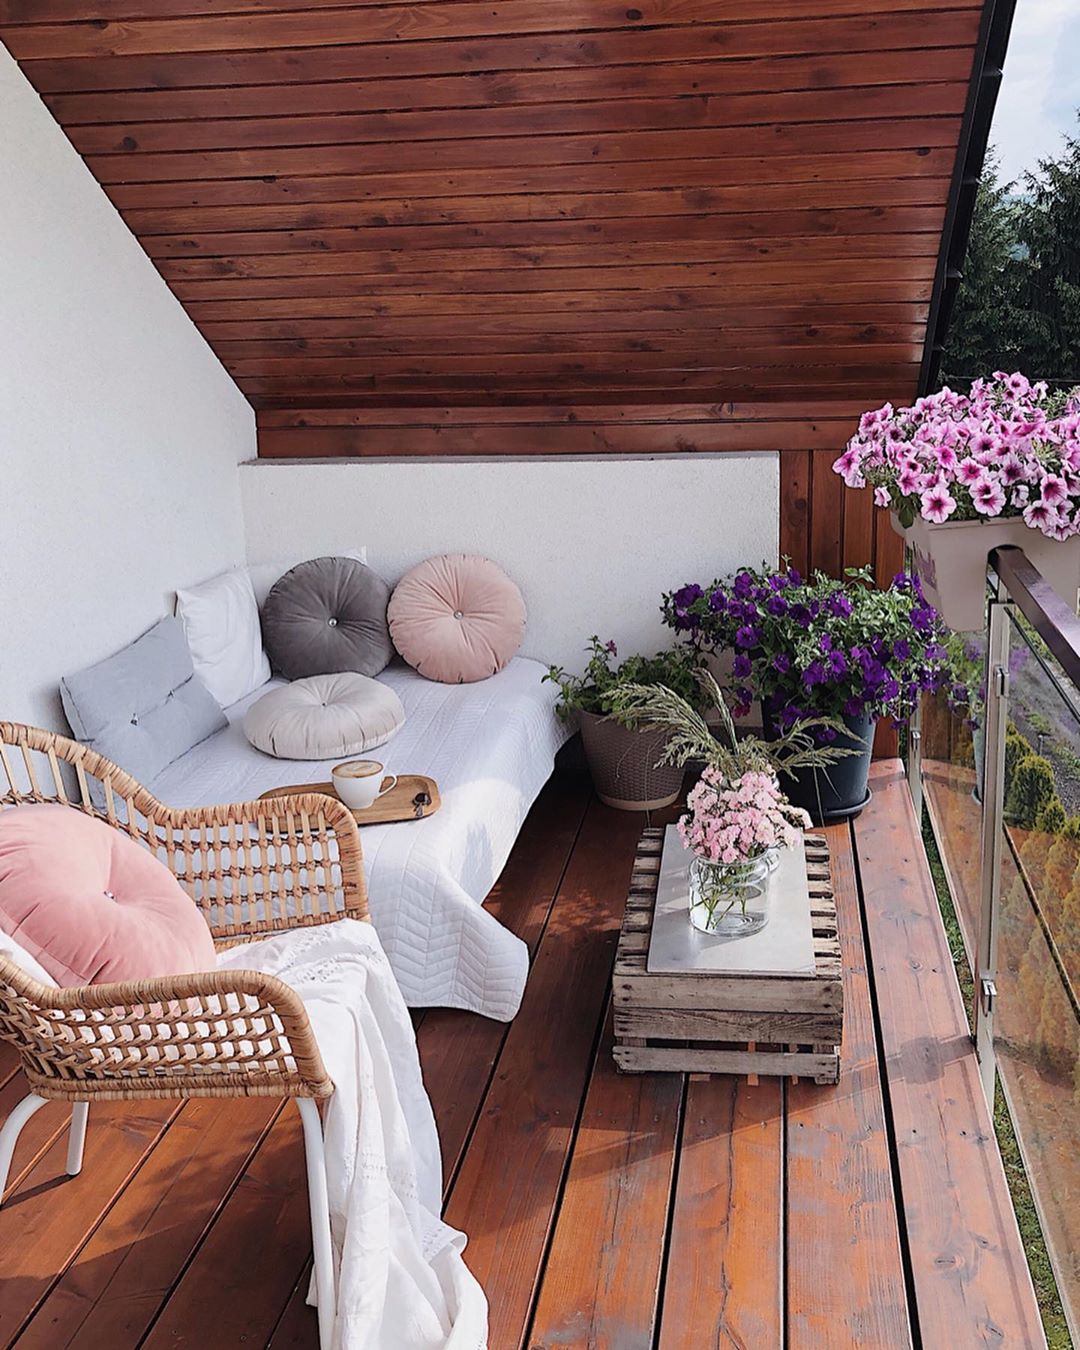 40 Cozy Balcony Ideas and Decor Inspiration 2019 - Page 37 of 41 - My Blog